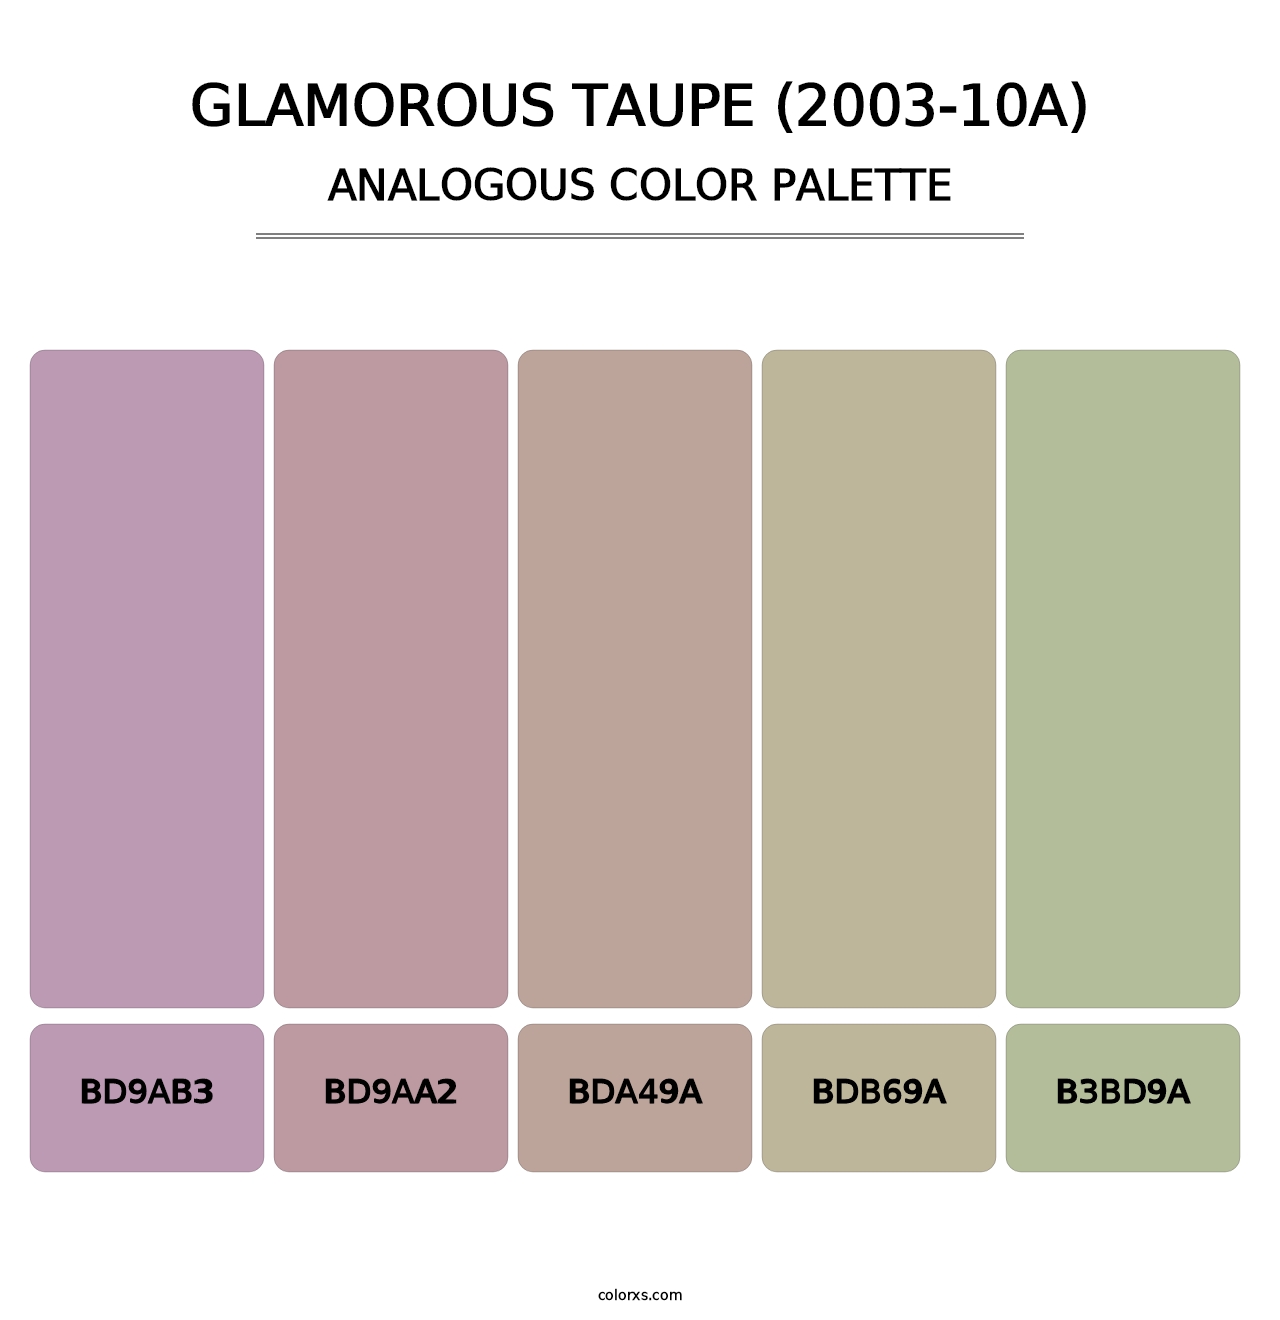 Glamorous Taupe (2003-10A) - Analogous Color Palette